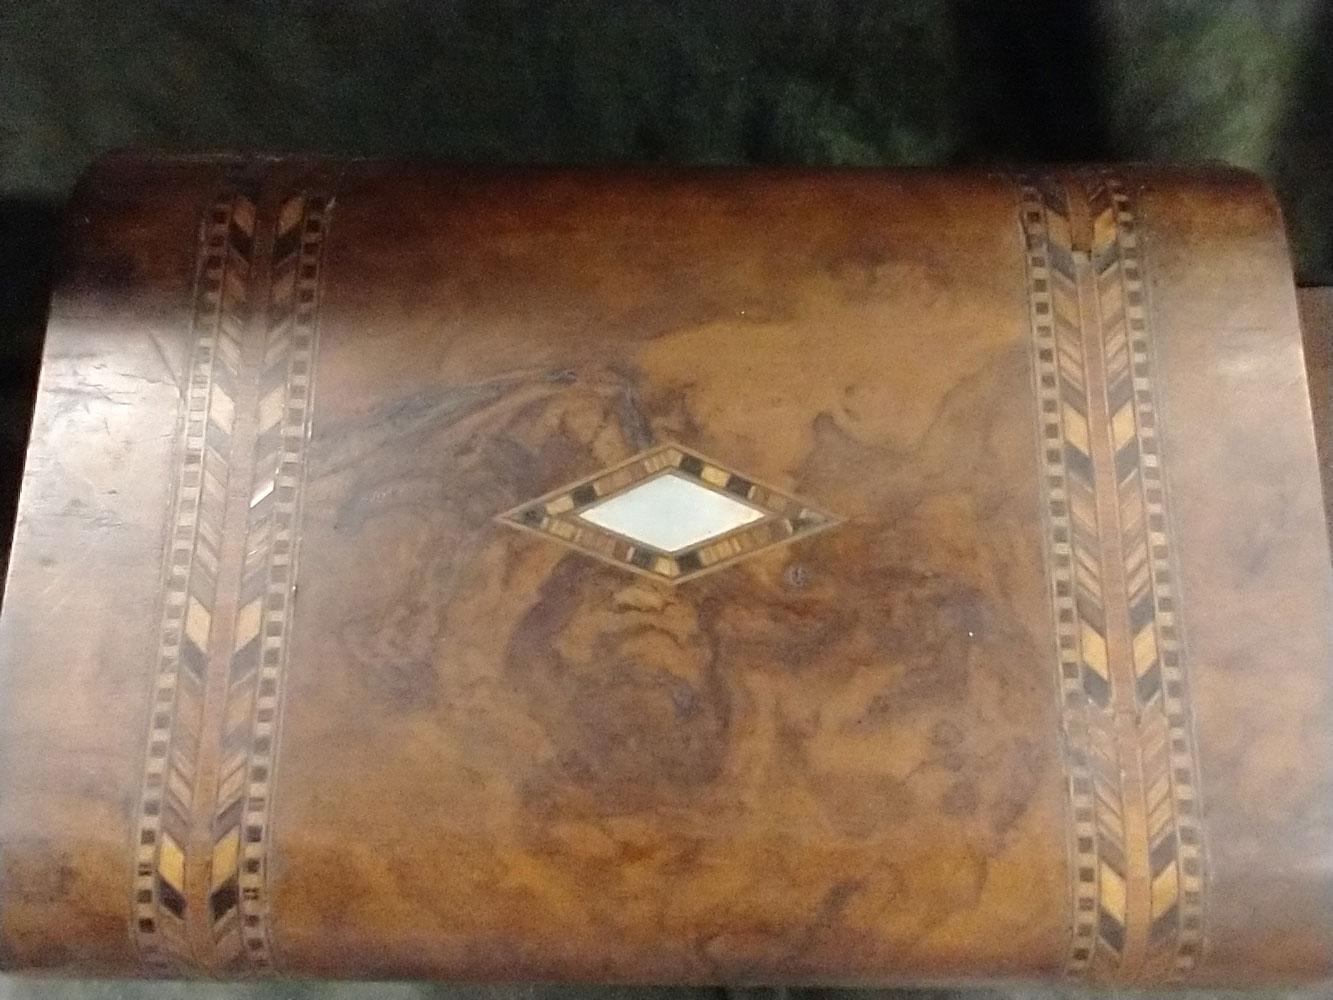 12"l. Victorian burled walnut writing box with velvet-lined interior and mother of pearl inlay